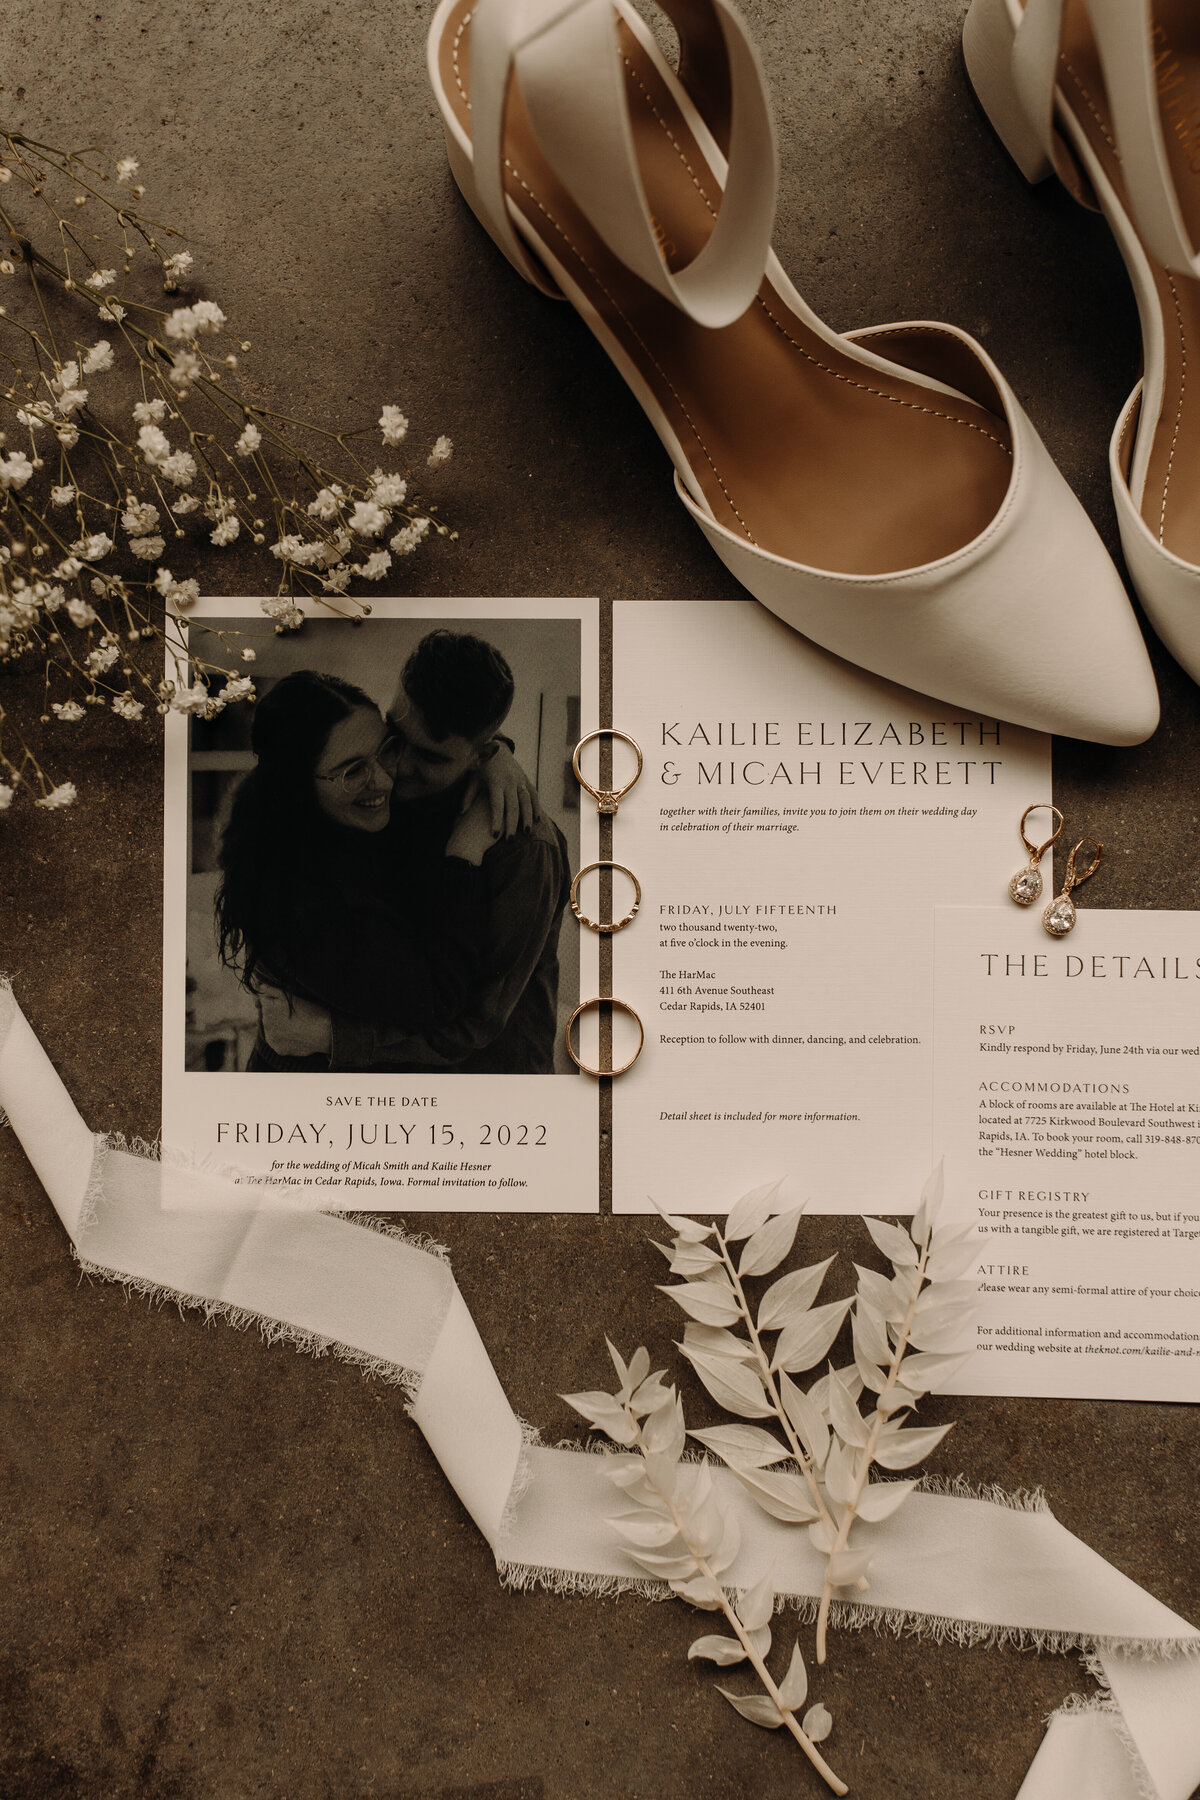 wedding invitation, shoes, rings, jewelry, and other details